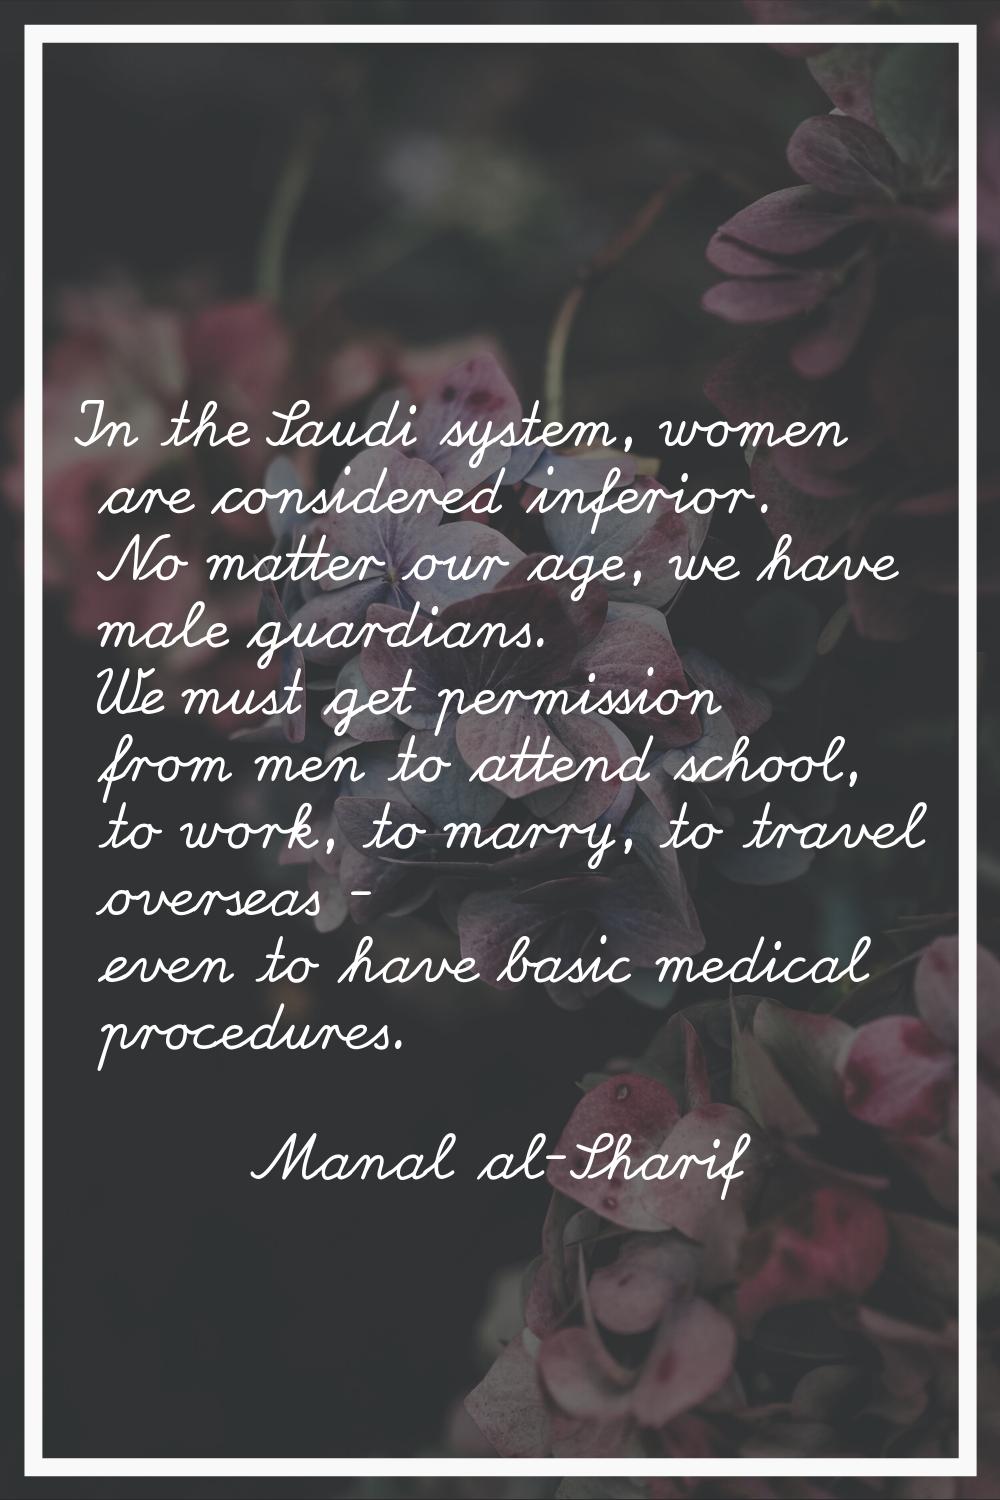 In the Saudi system, women are considered inferior. No matter our age, we have male guardians. We m